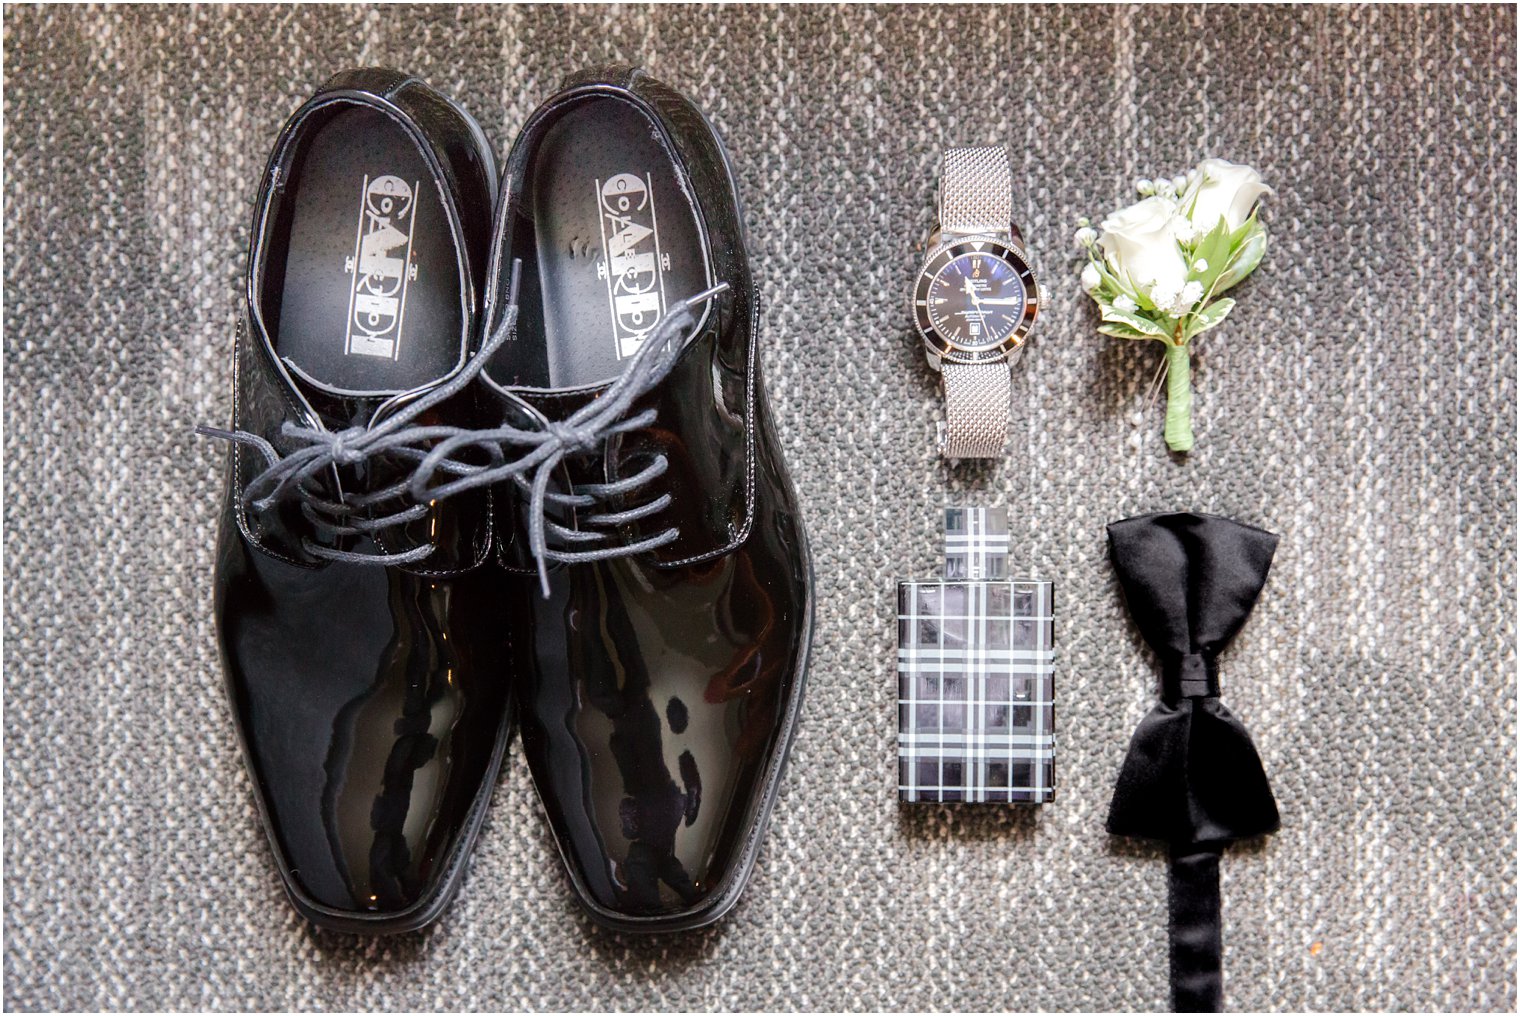 Groom shoes and accessories on wedding day